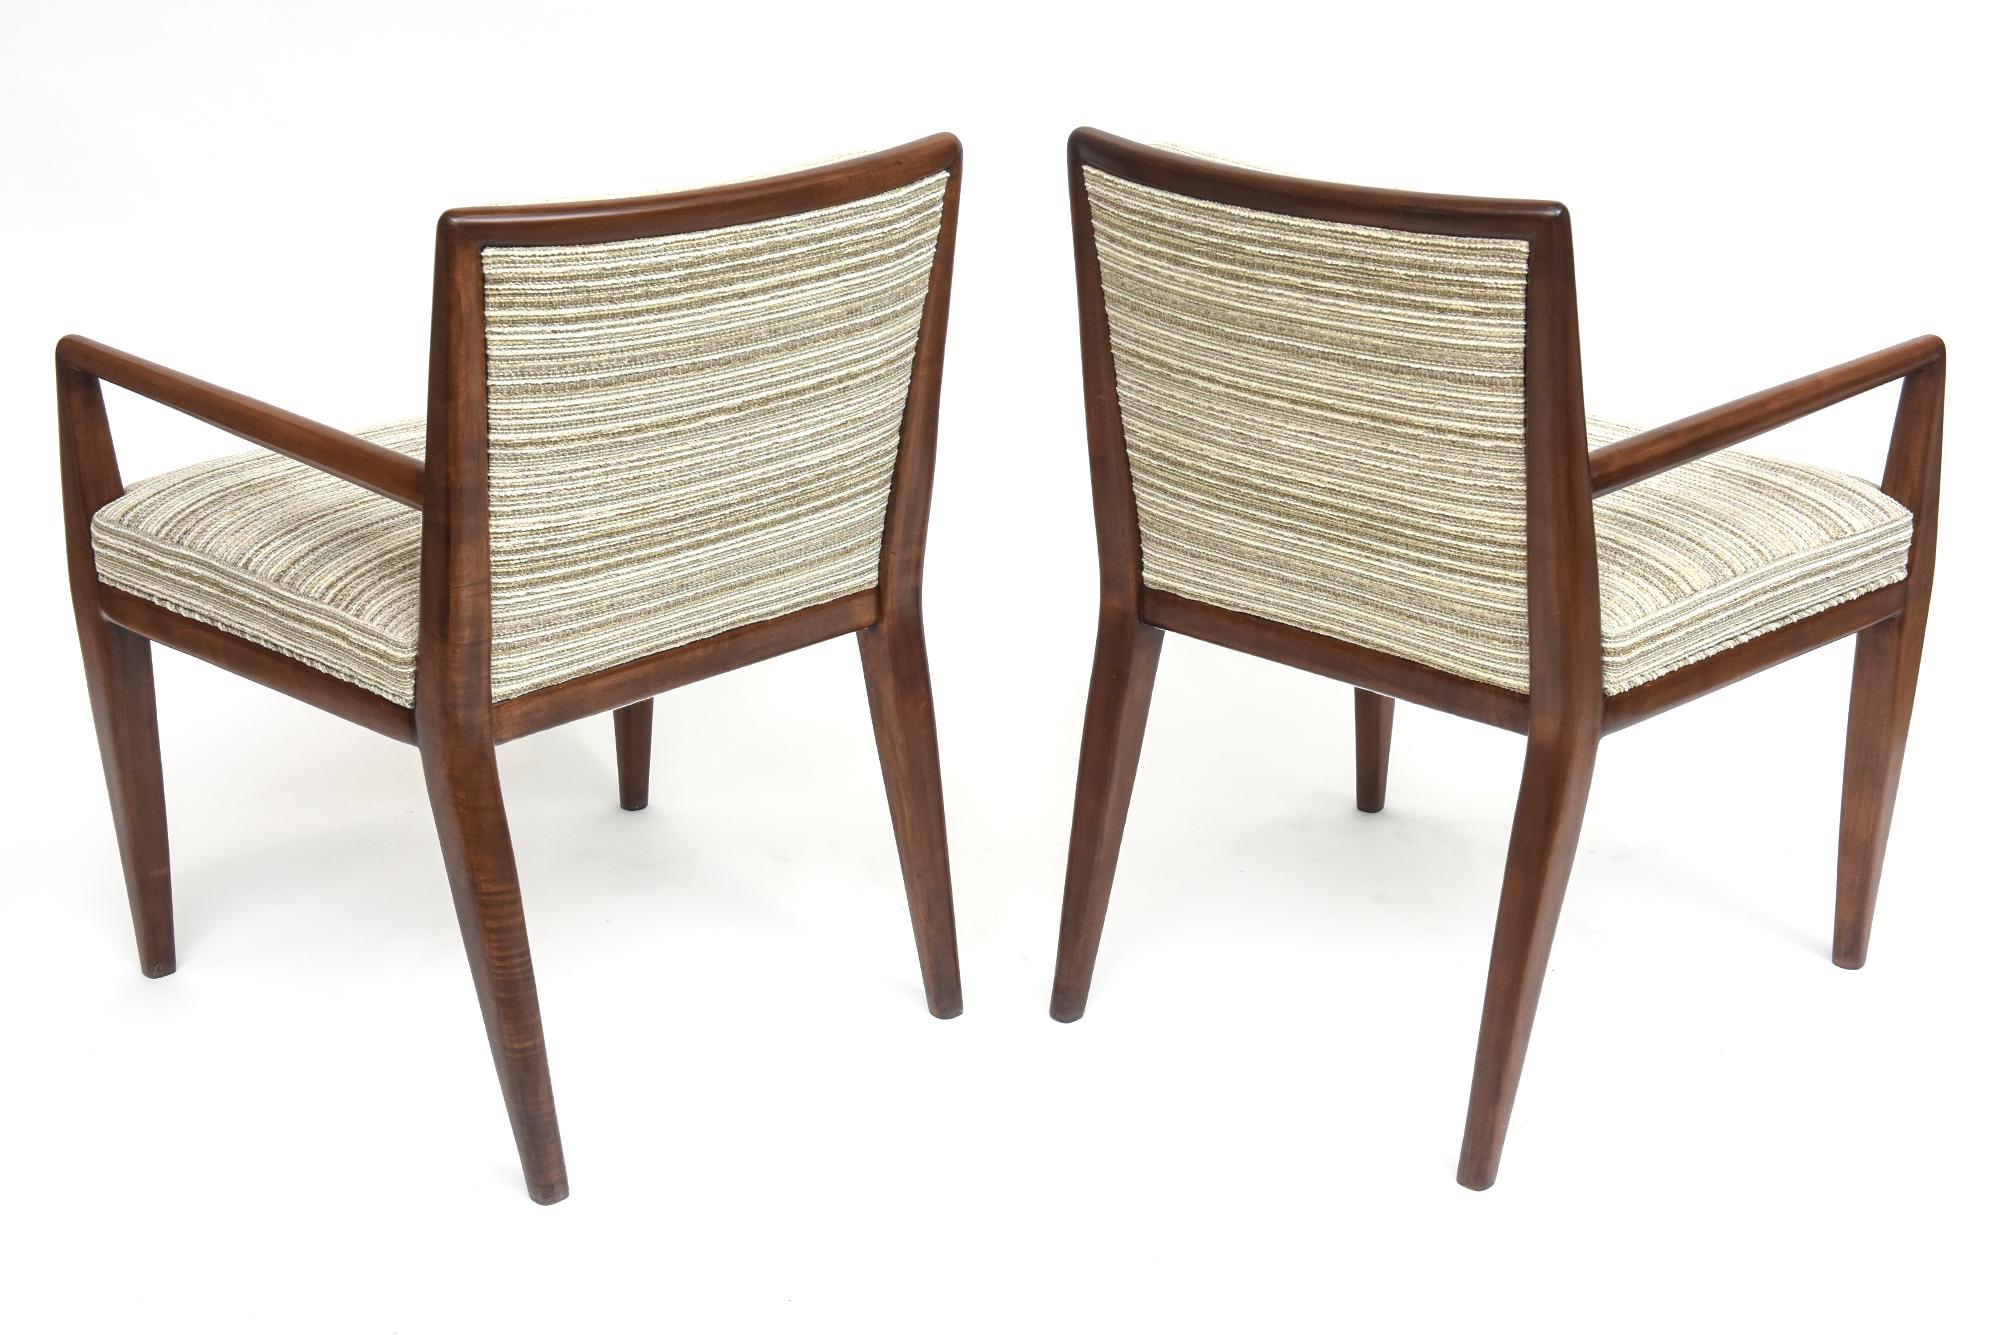 Walnut Open Armchairs by T.H. Robsjohn-Gibbings for Widdicomb In Good Condition For Sale In North Miami, FL